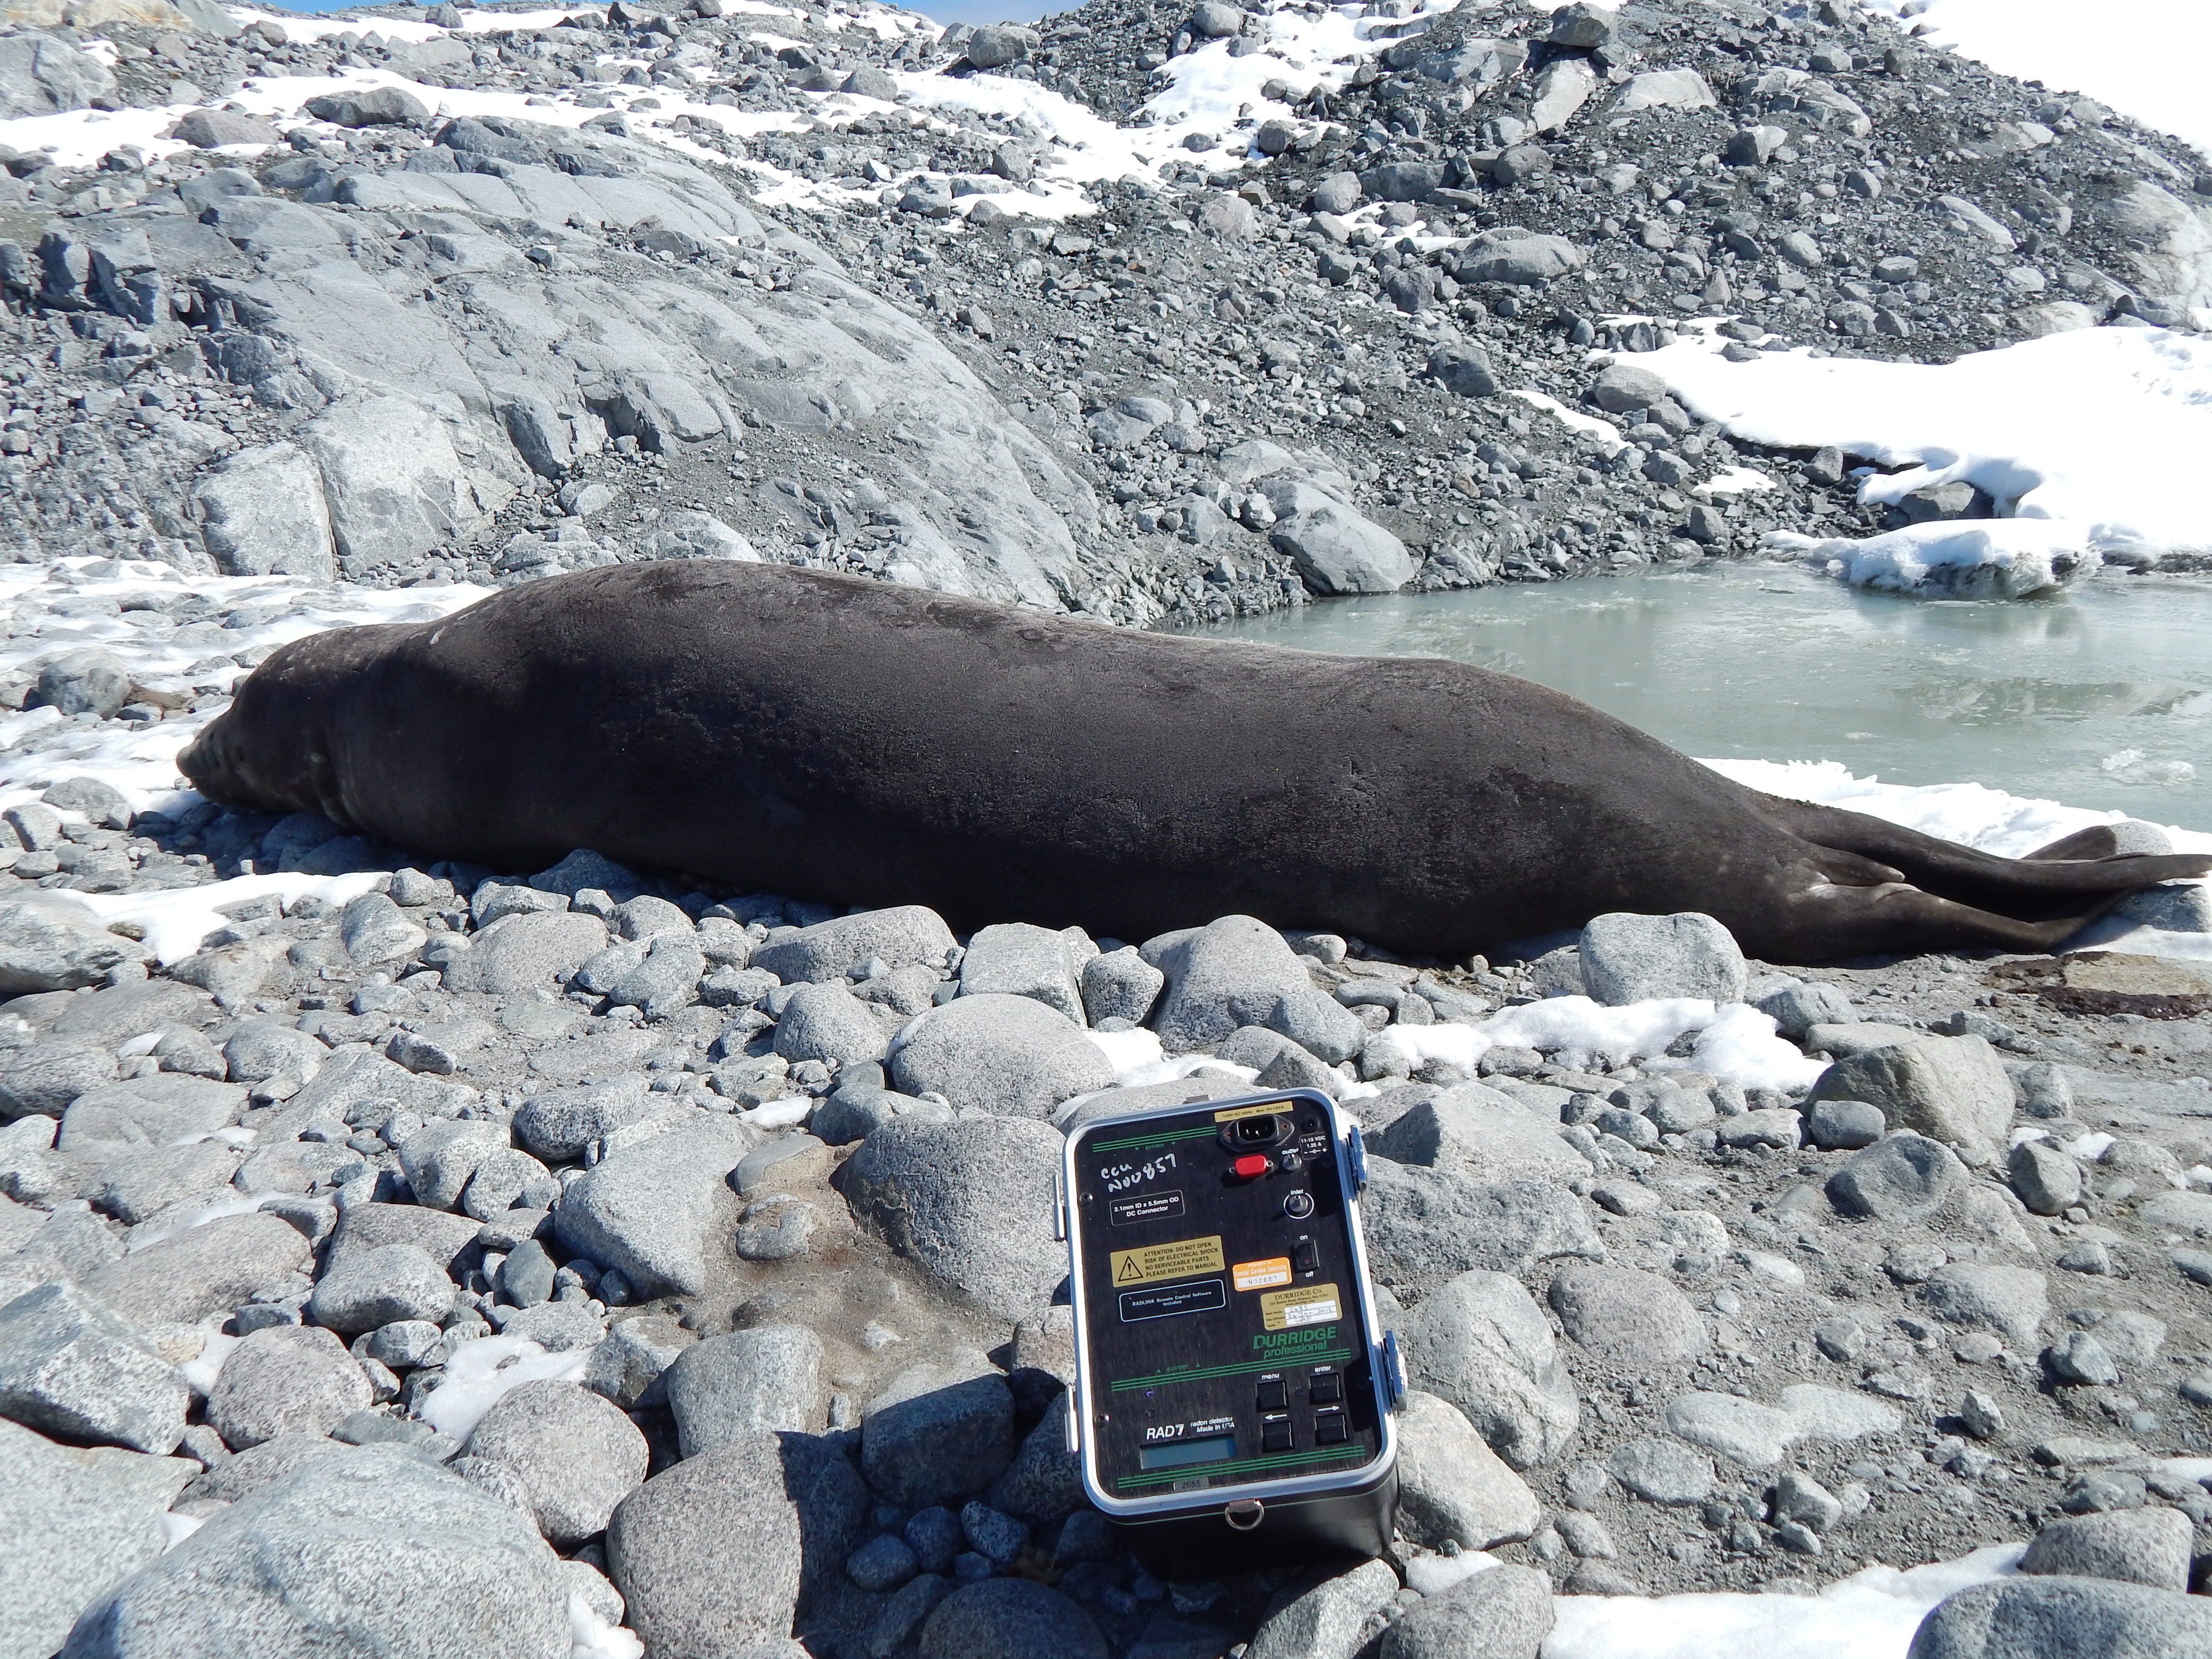 RAD7-and-Seal-in-Antarctica-Photo-by-Rick-Peterson